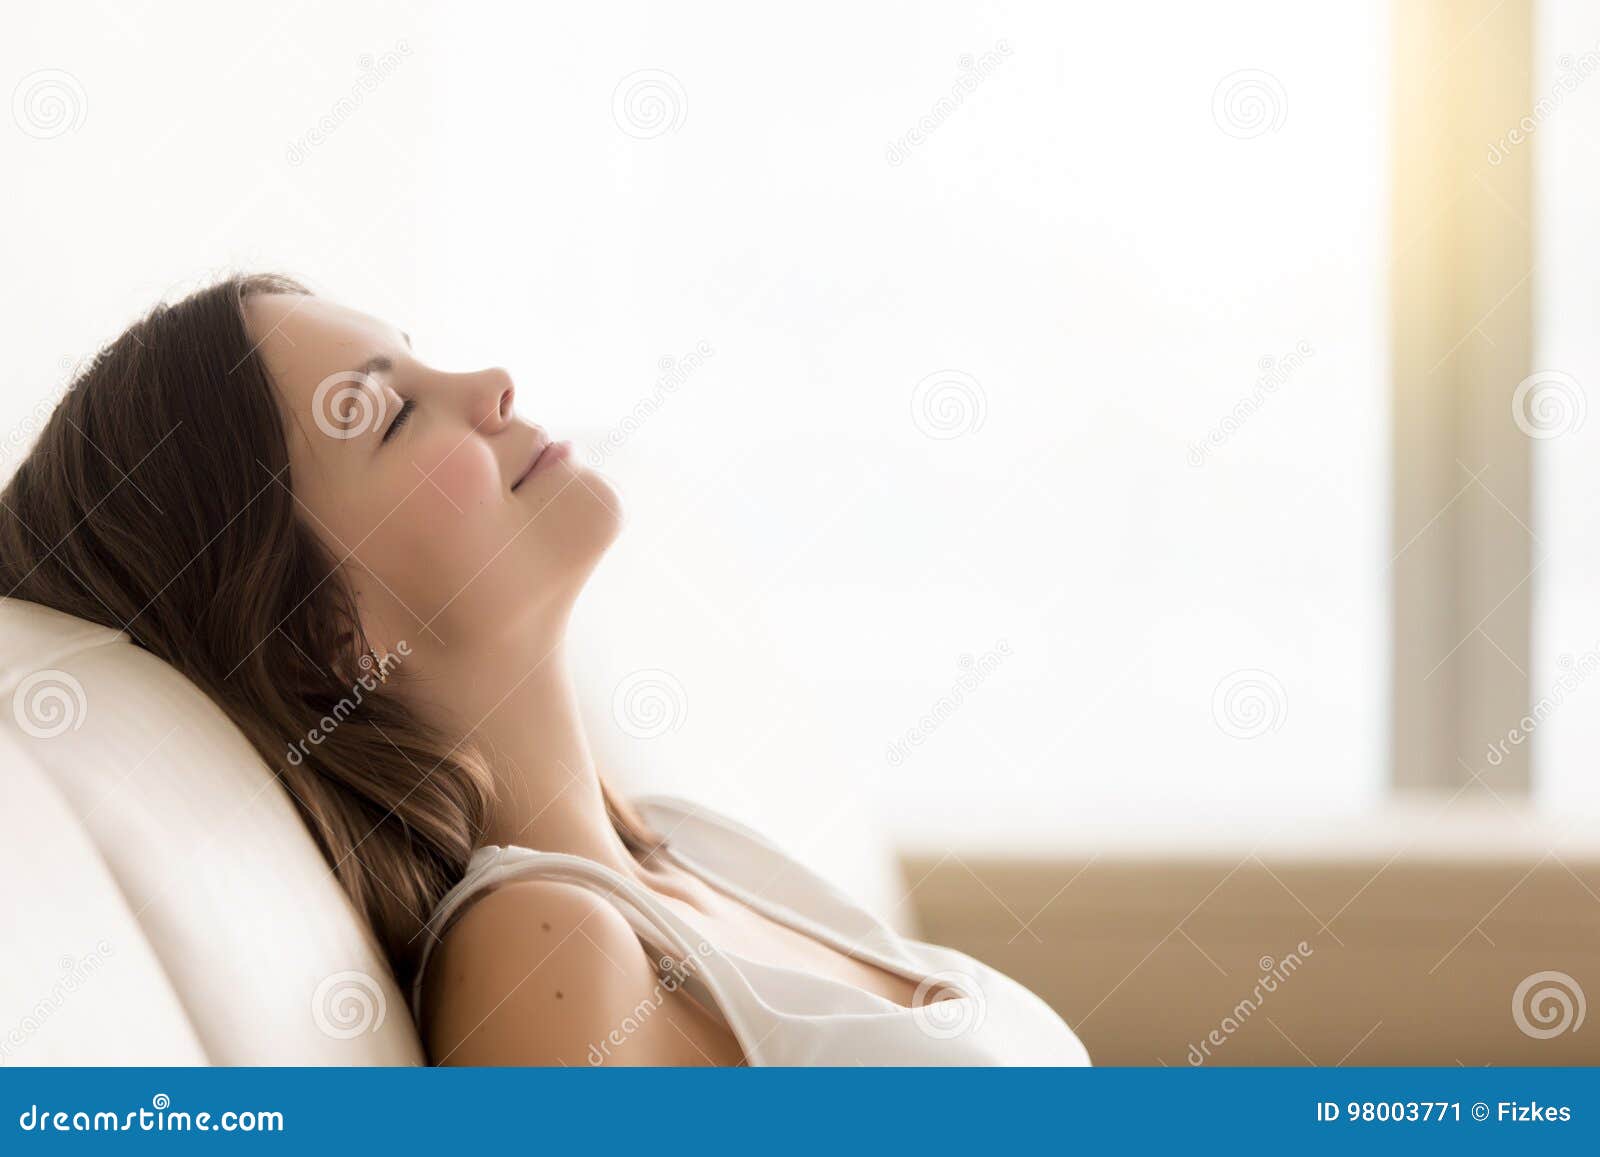 relaxed young woman enjoying rest on comfortable sofa, copy spac